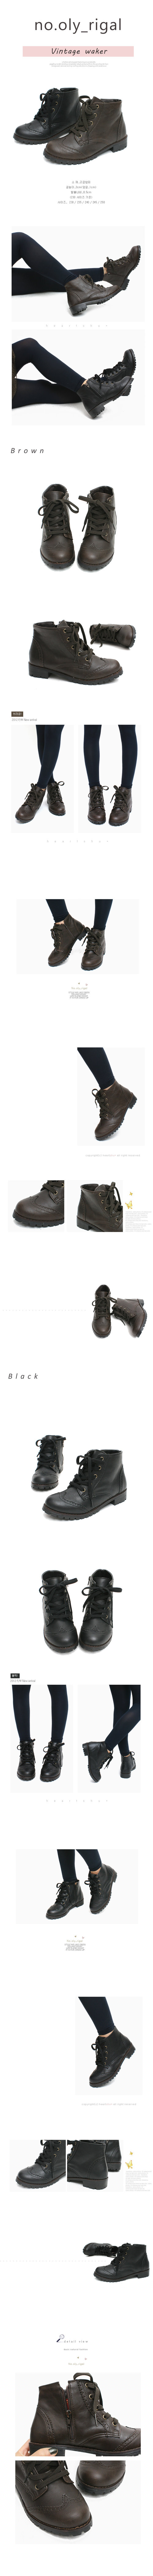 Combat Boots
Love the versatility of this badass boots for casual look. 